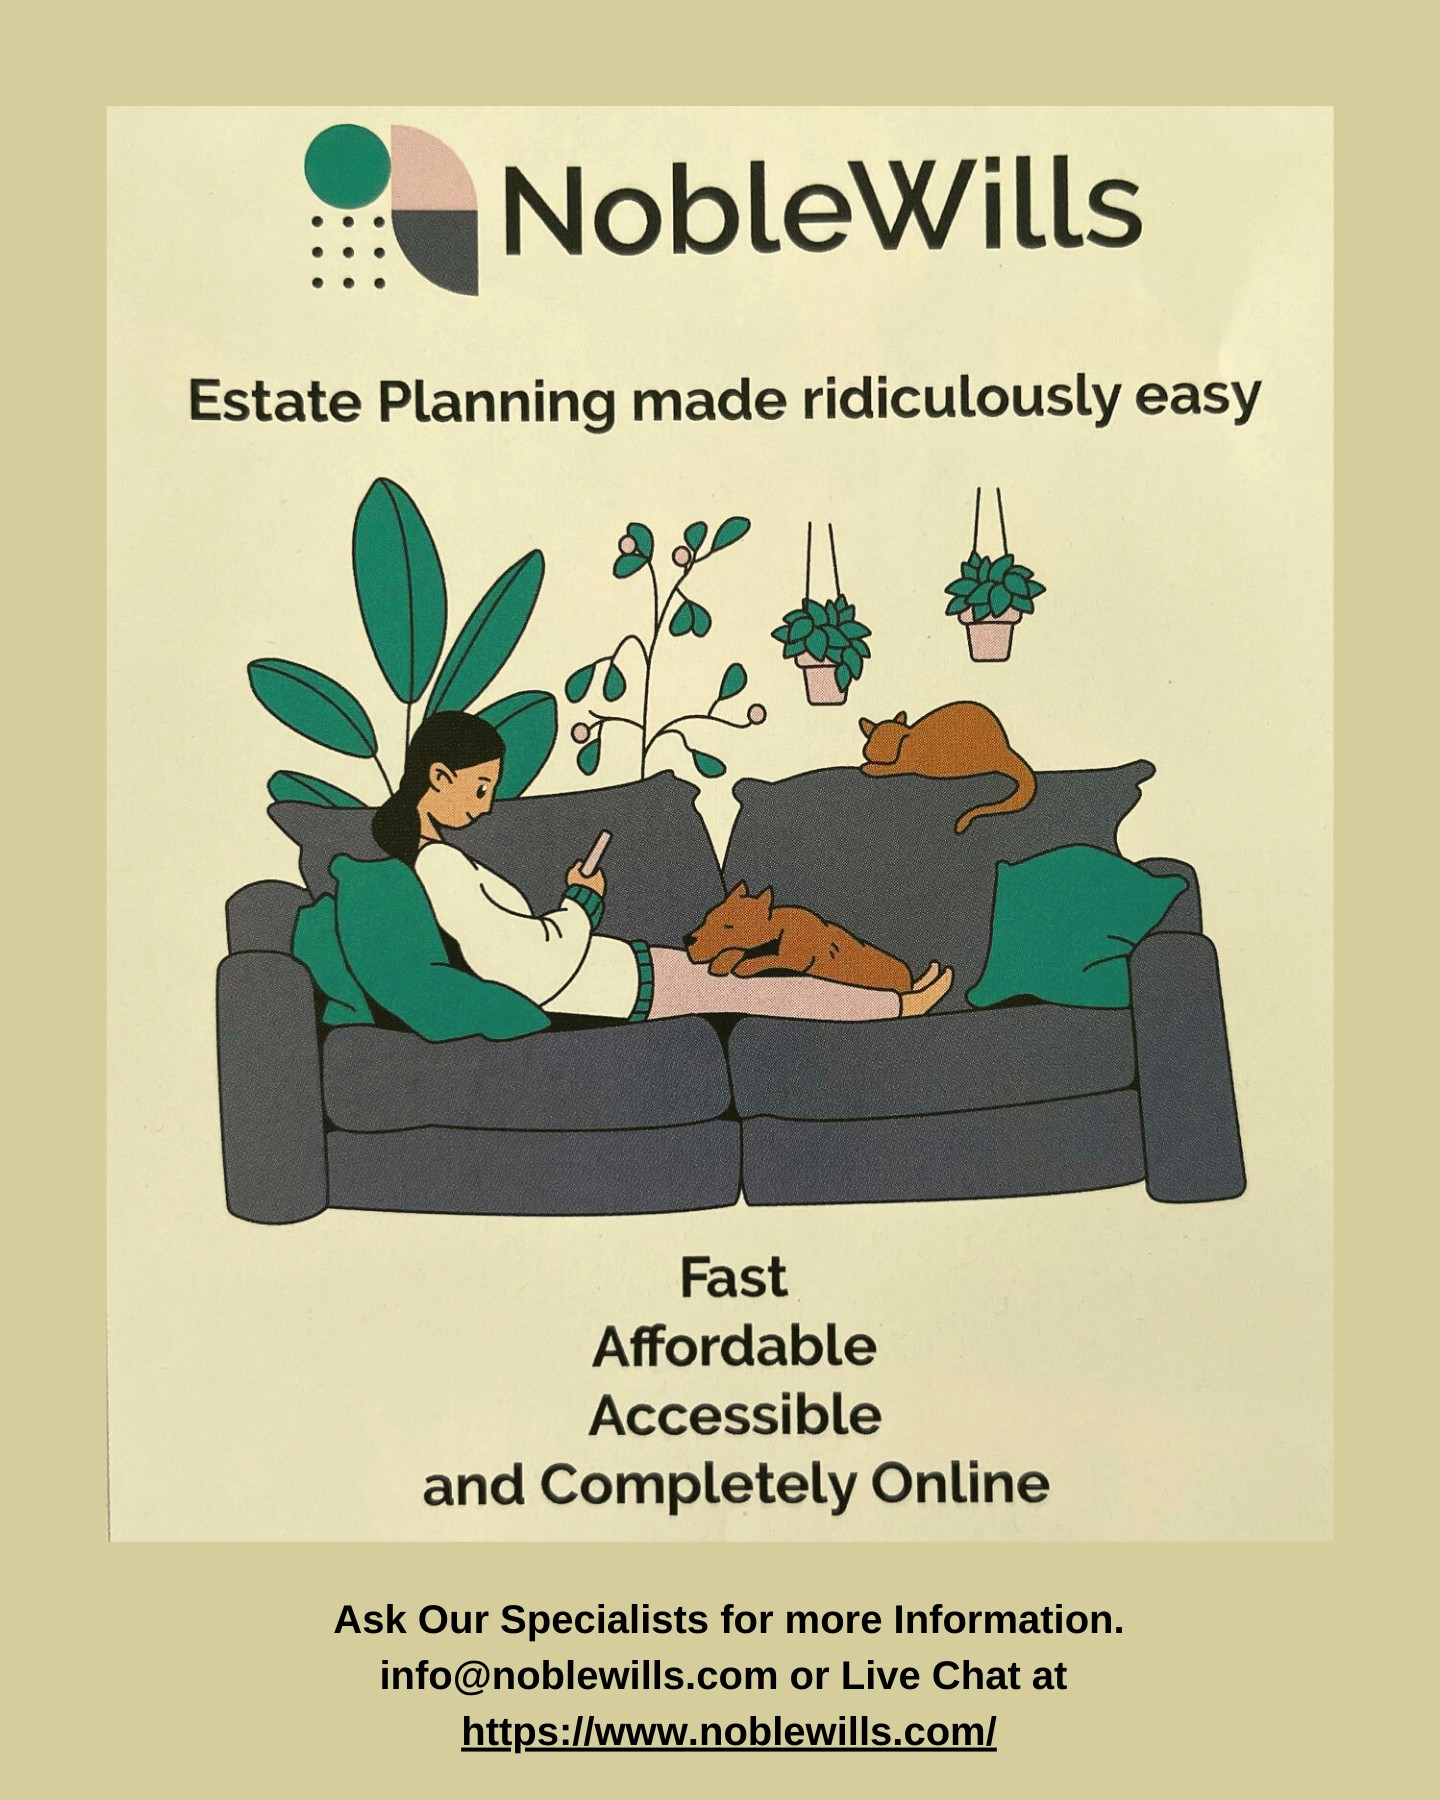 Online Wills for Estate Planning made ridiculously easy! NobleWills